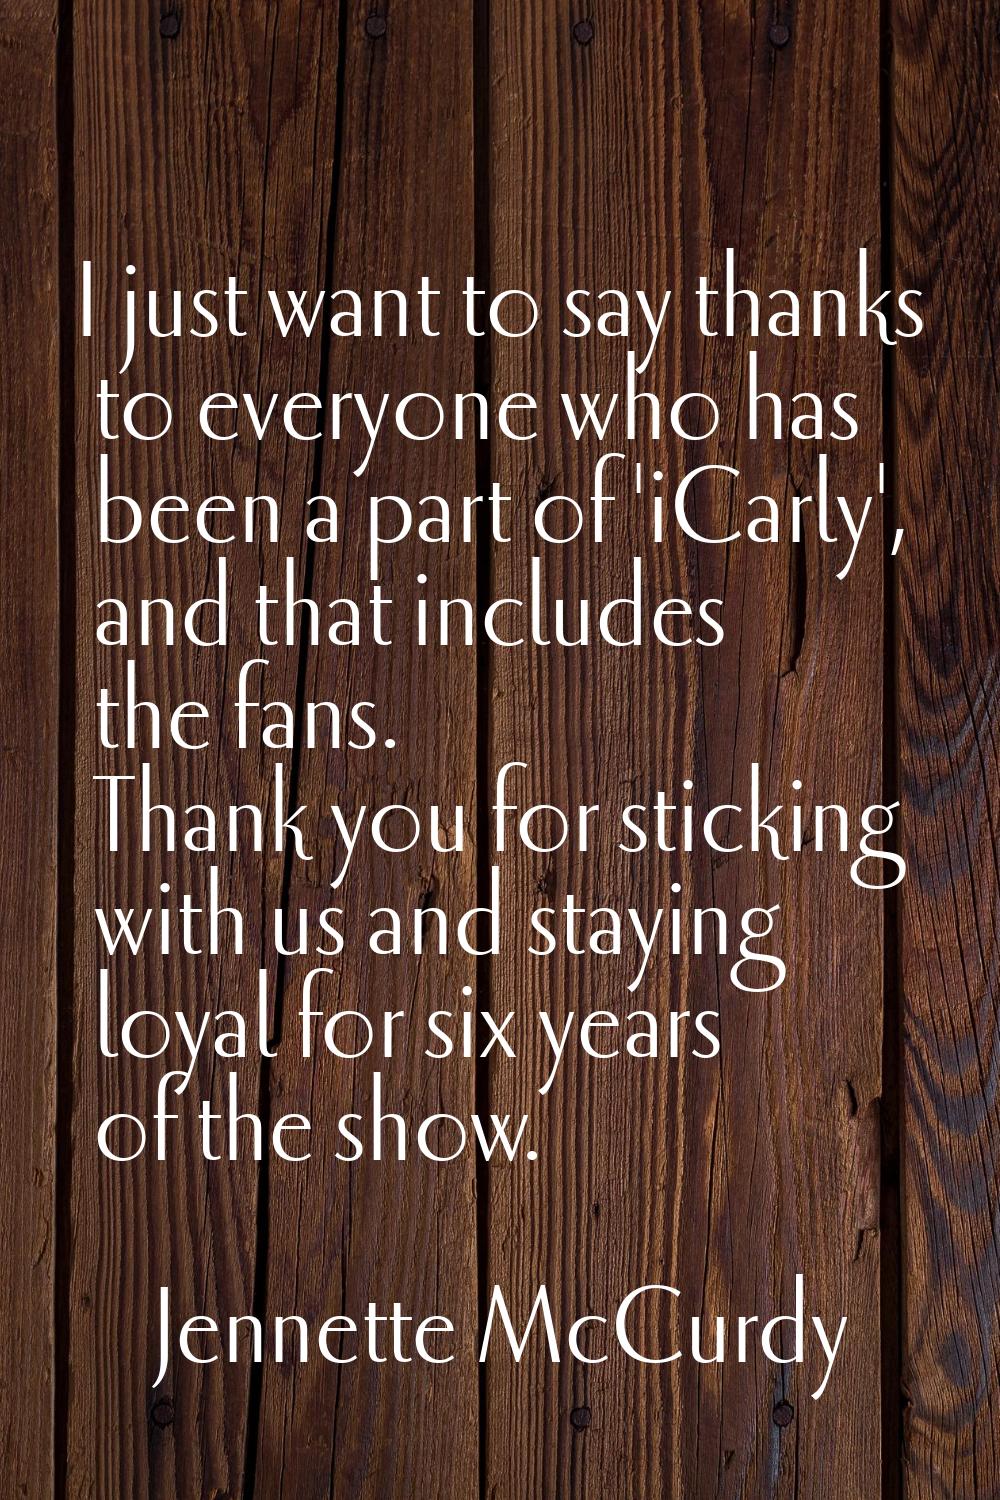 I just want to say thanks to everyone who has been a part of 'iCarly', and that includes the fans. 